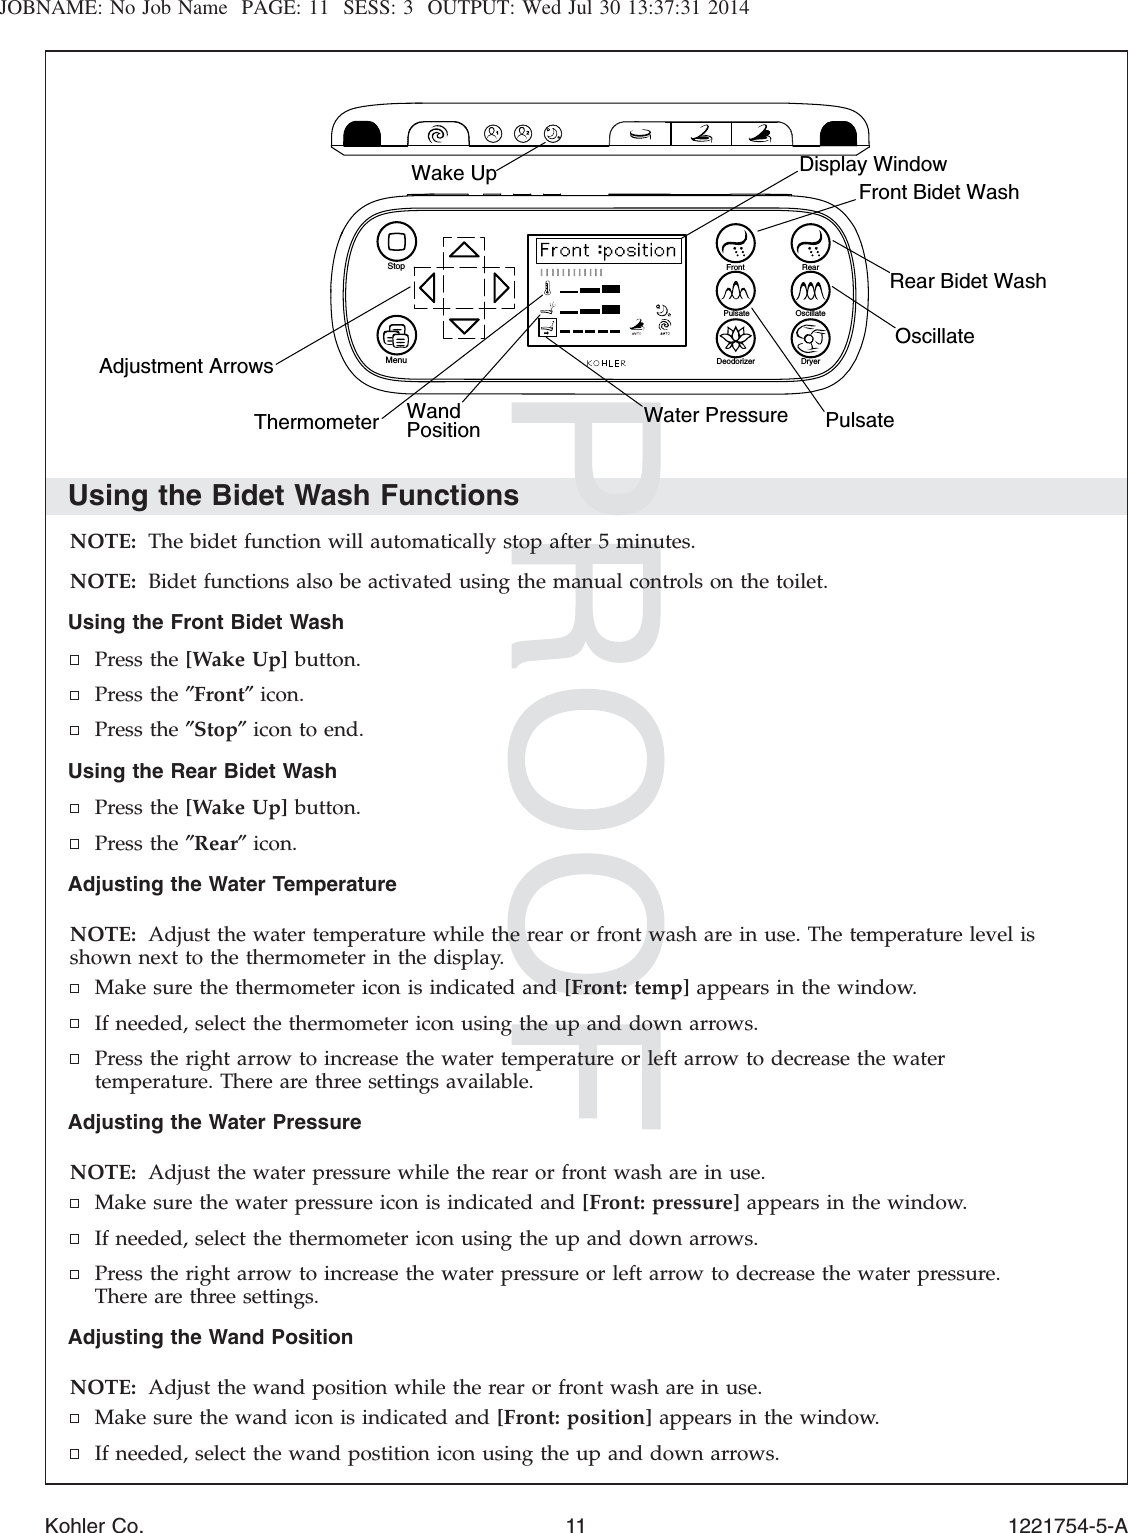 JOBNAME: No Job Name PAGE: 11 SESS: 3 OUTPUT: Wed Jul 30 13:37:31 2014Using the Bidet Wash FunctionsNOTE: The bidet function will automatically stop after 5 minutes.NOTE: Bidet functions also be activated using the manual controls on the toilet.Using the Front Bidet WashPress the [Wake Up] button.Press the ″Front″icon.Press the ″Stop″icon to end.Using the Rear Bidet WashPress the [Wake Up] button.Press the ″Rear″icon.Adjusting the Water TemperatureNOTE: Adjust the water temperature while the rear or front wash are in use. The temperature level isshown next to the thermometer in the display.Make sure the thermometer icon is indicated and [Front: temp] appears in the window.If needed, select the thermometer icon using the up and down arrows.Press the right arrow to increase the water temperature or left arrow to decrease the watertemperature. There are three settings available.Adjusting the Water PressureNOTE: Adjust the water pressure while the rear or front wash are in use.Make sure the water pressure icon is indicated and [Front: pressure] appears in the window.If needed, select the thermometer icon using the up and down arrows.Press the right arrow to increase the water pressure or left arrow to decrease the water pressure.There are three settings.Adjusting the Wand PositionNOTE: Adjust the wand position while the rear or front wash are in use.Make sure the wand icon is indicated and [Front: position] appears in the window.If needed, select the wand postition icon using the up and down arrows.OscillatePulsateRear Bidet WashFront Bidet WashDisplay WindowWater PressureWandPositionThermometerAdjustment Arrows Deodorizer DryerPulsate OscillateRearFrontStopMenuWake UpKohler Co. 11 1221754-5-A